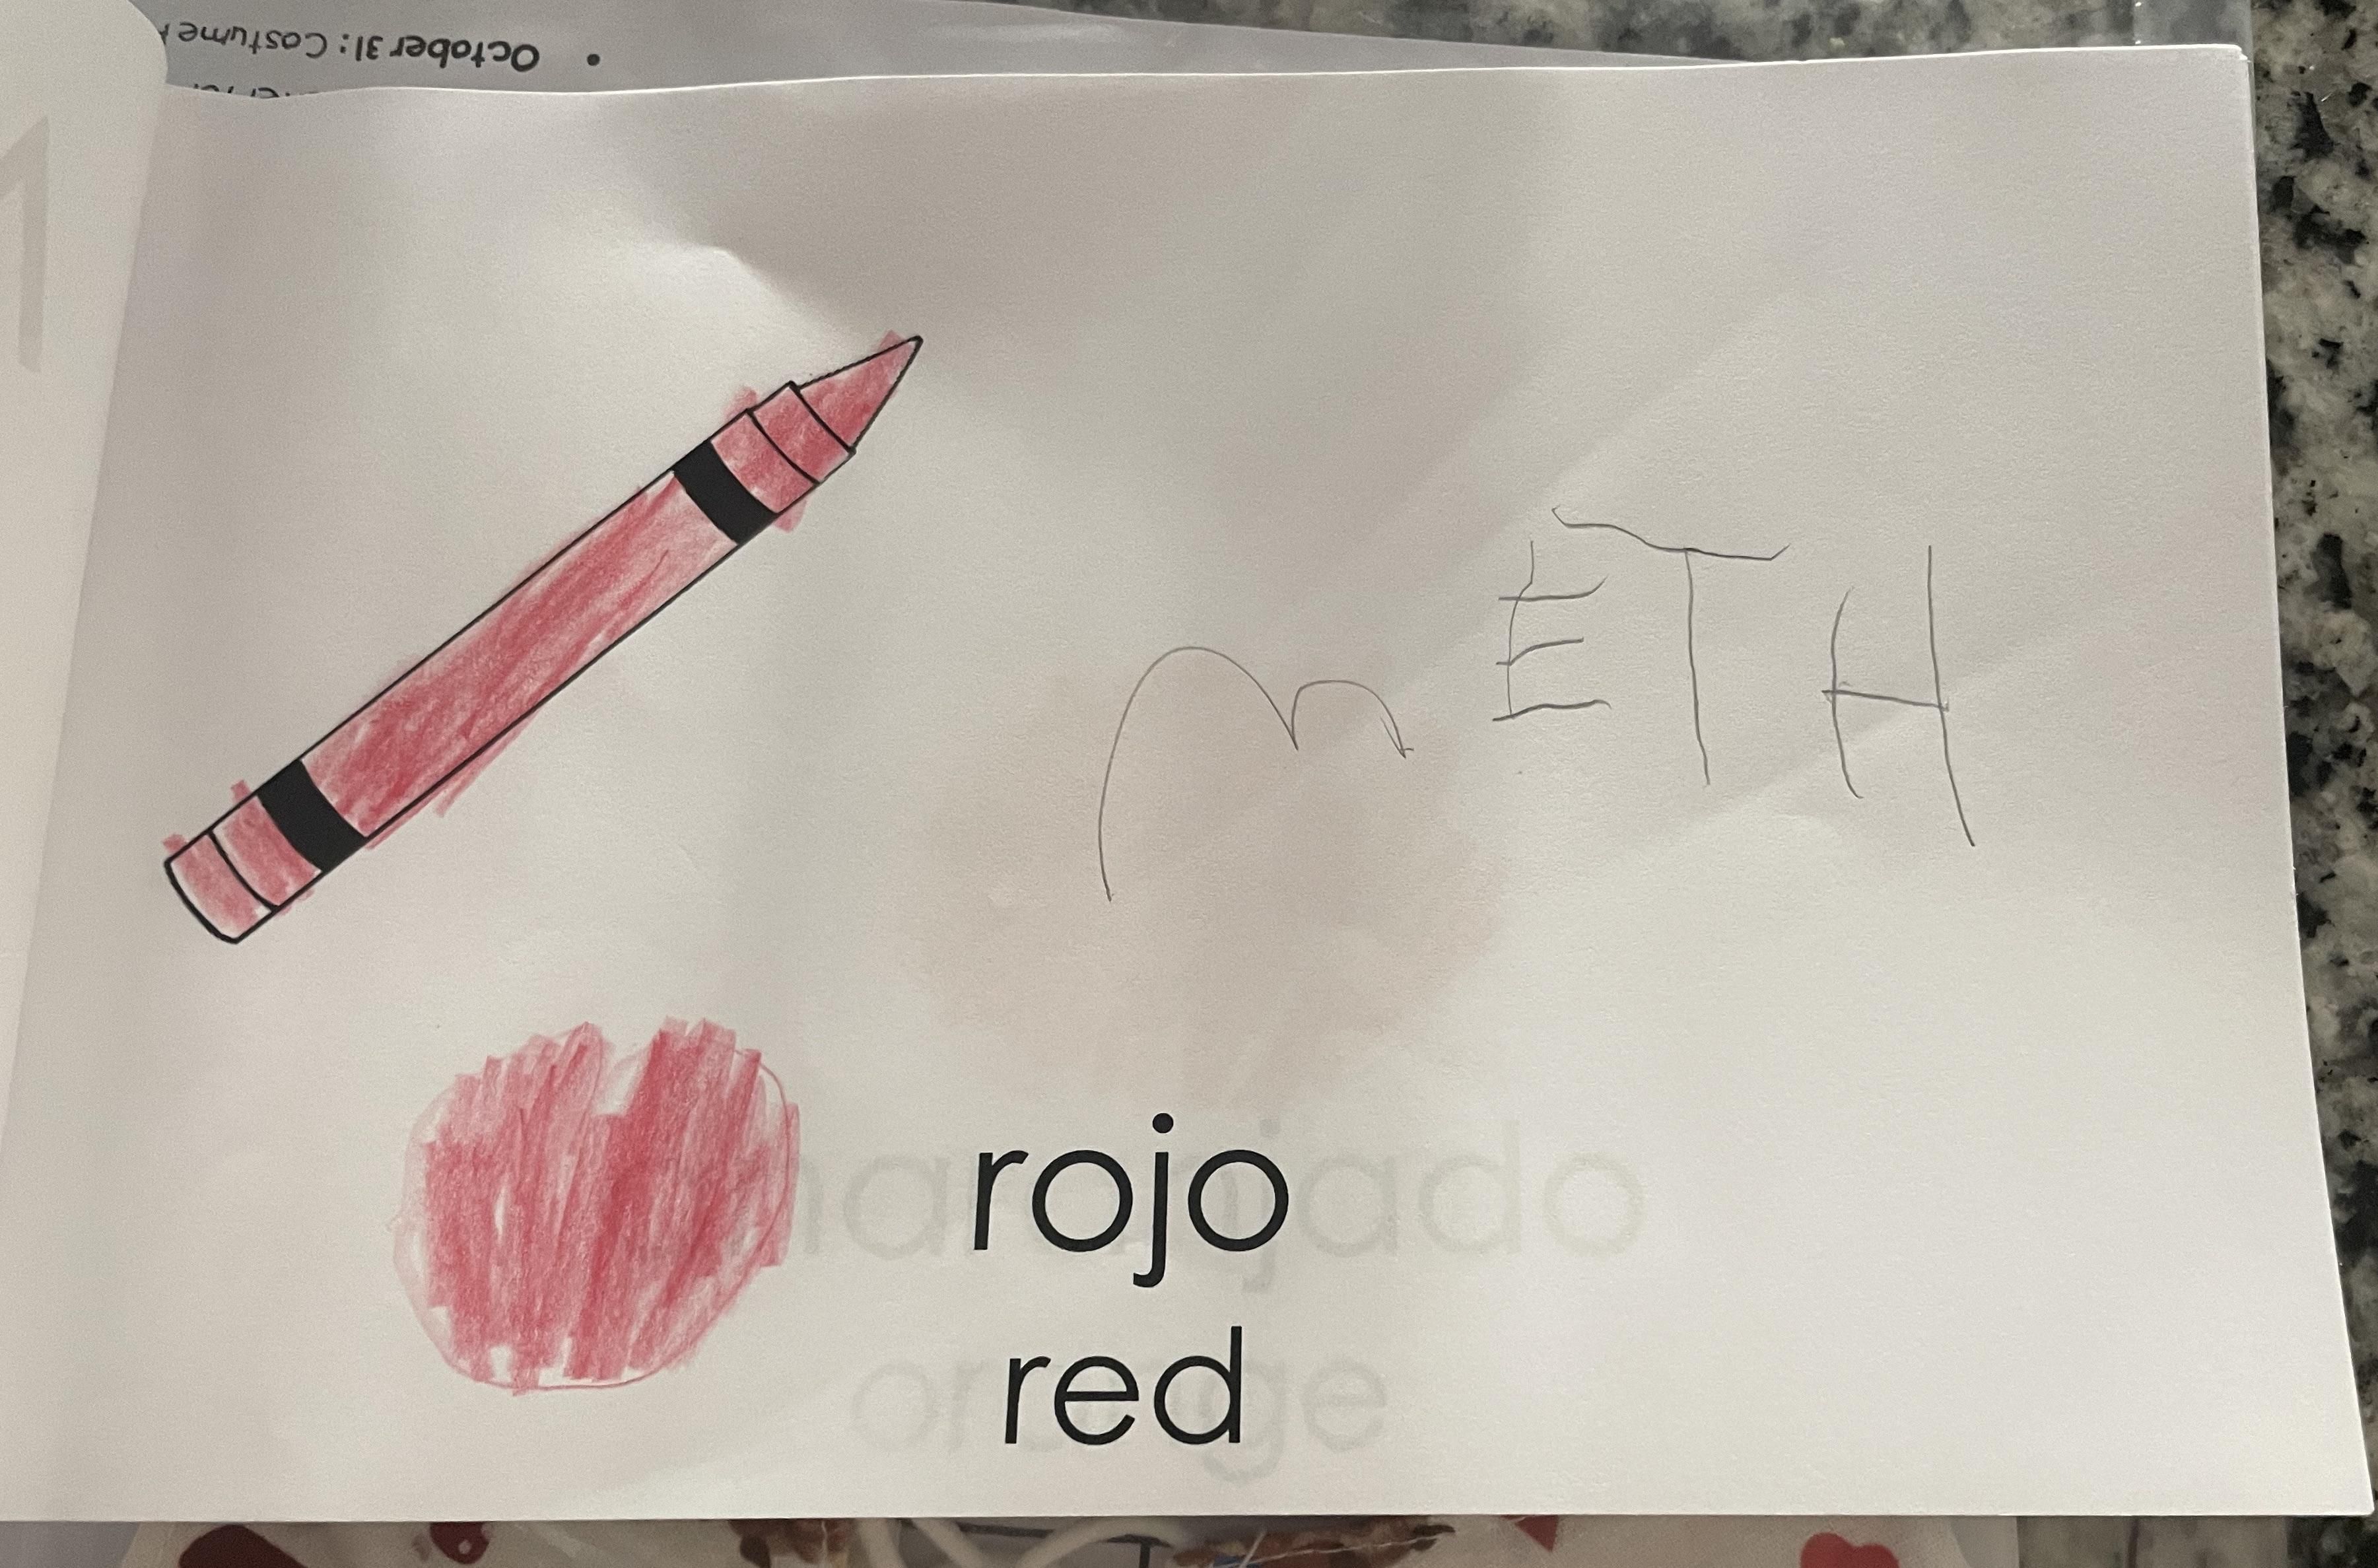 OC, My nephew is learning how to read and write. He can write part of his name